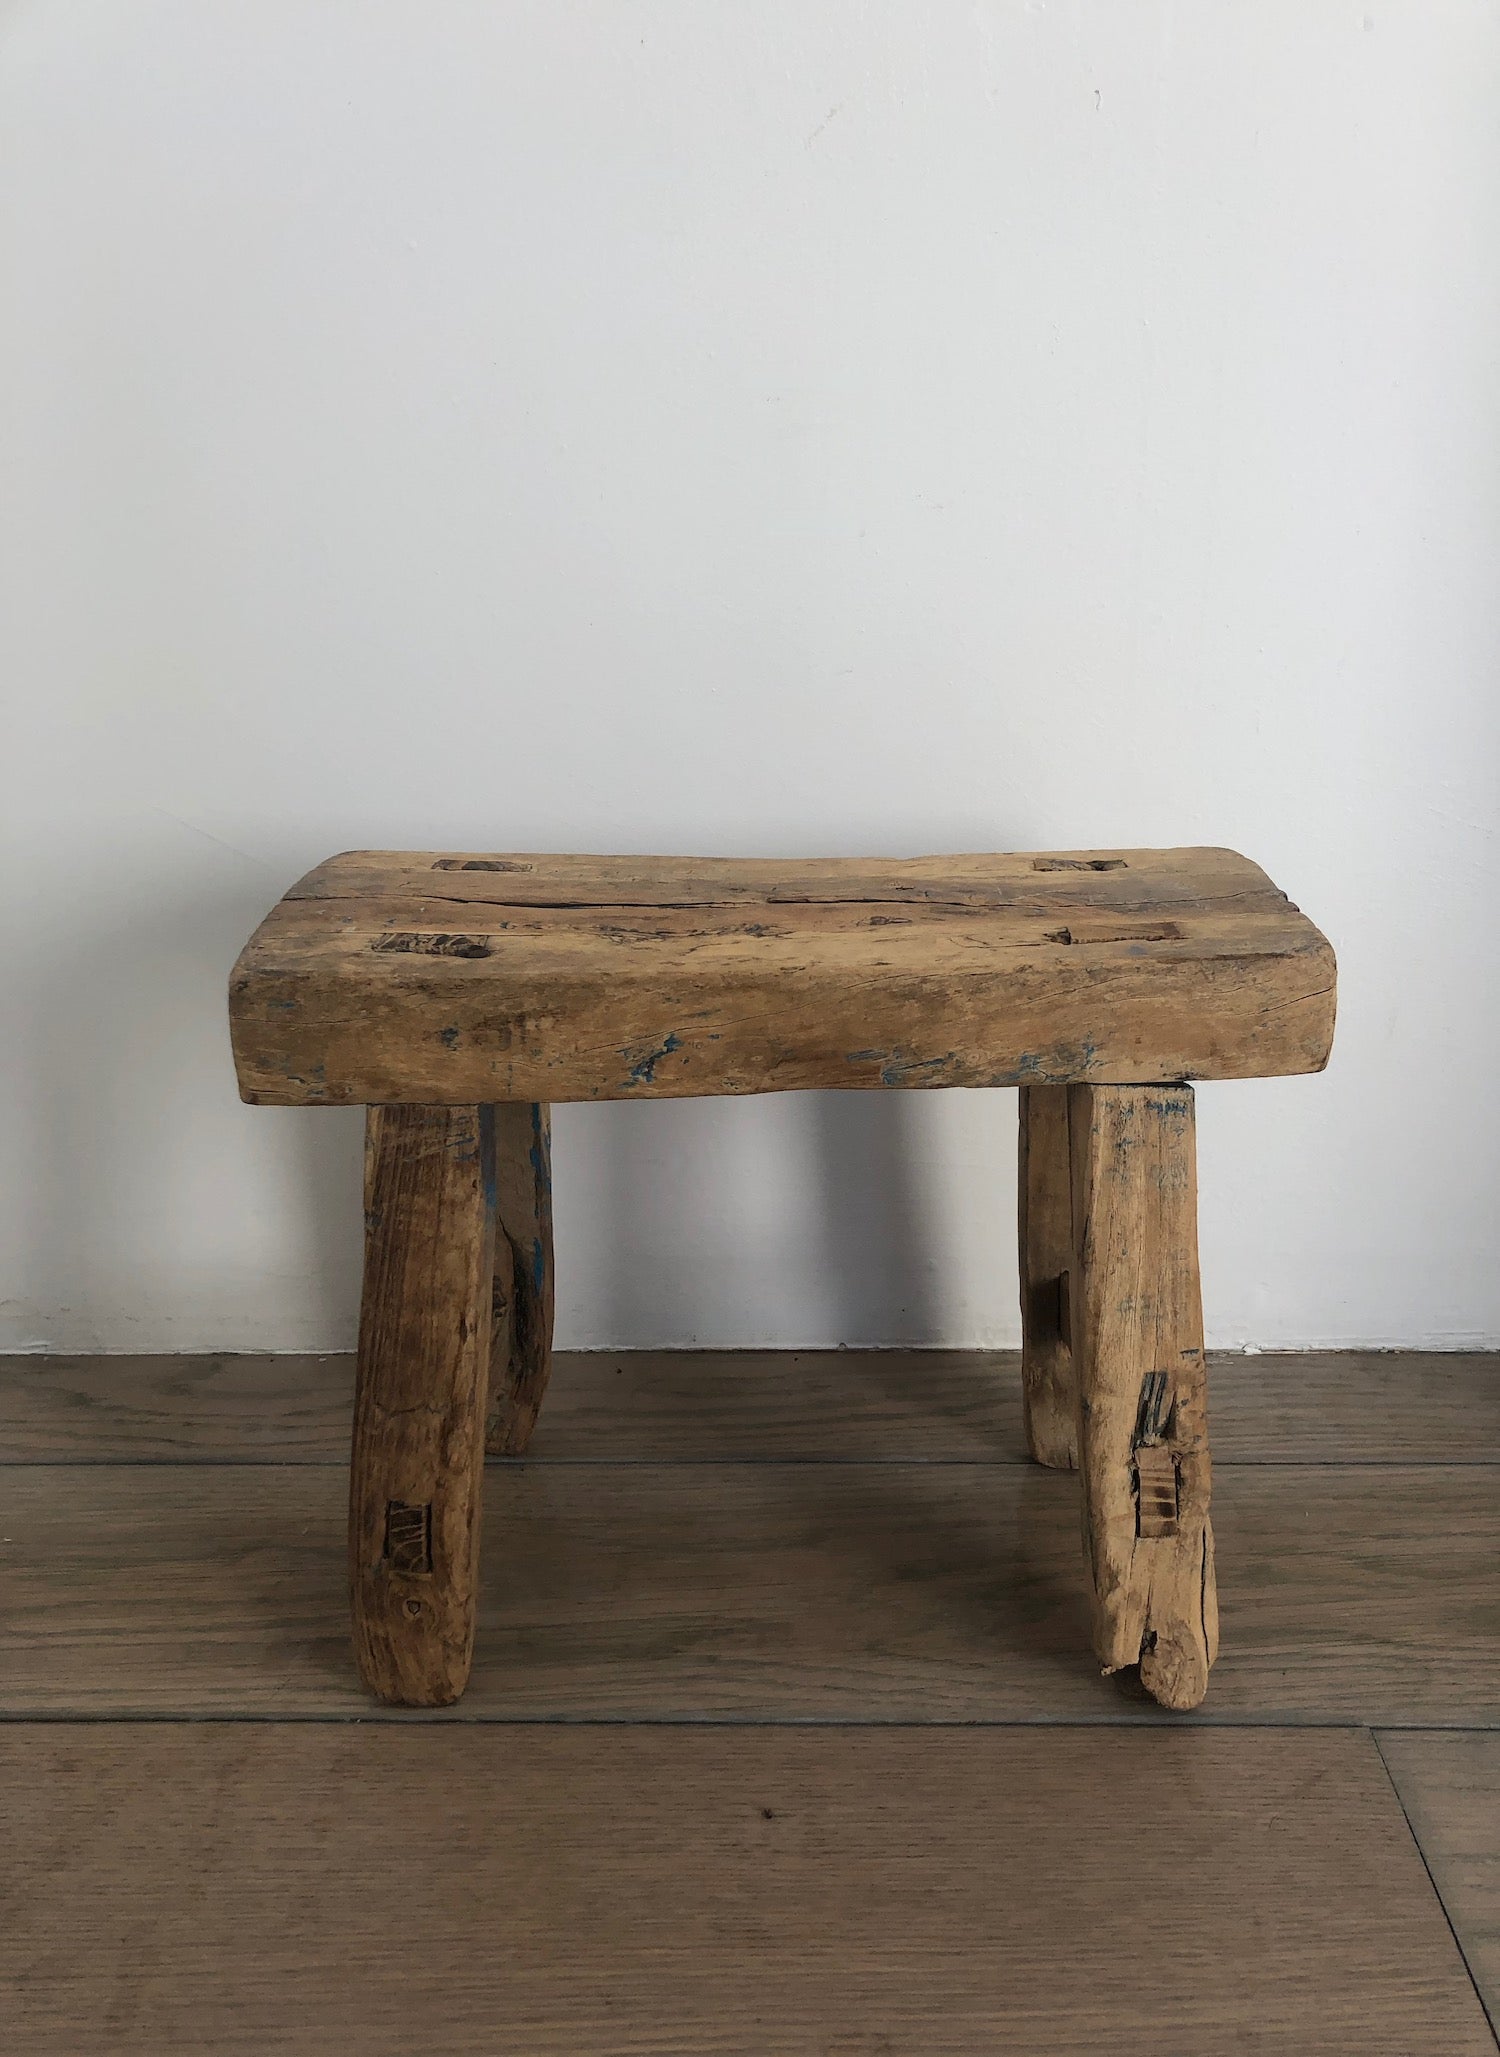 Vintage French accent stool with traces of blue pigment indicative of history and loving wear.